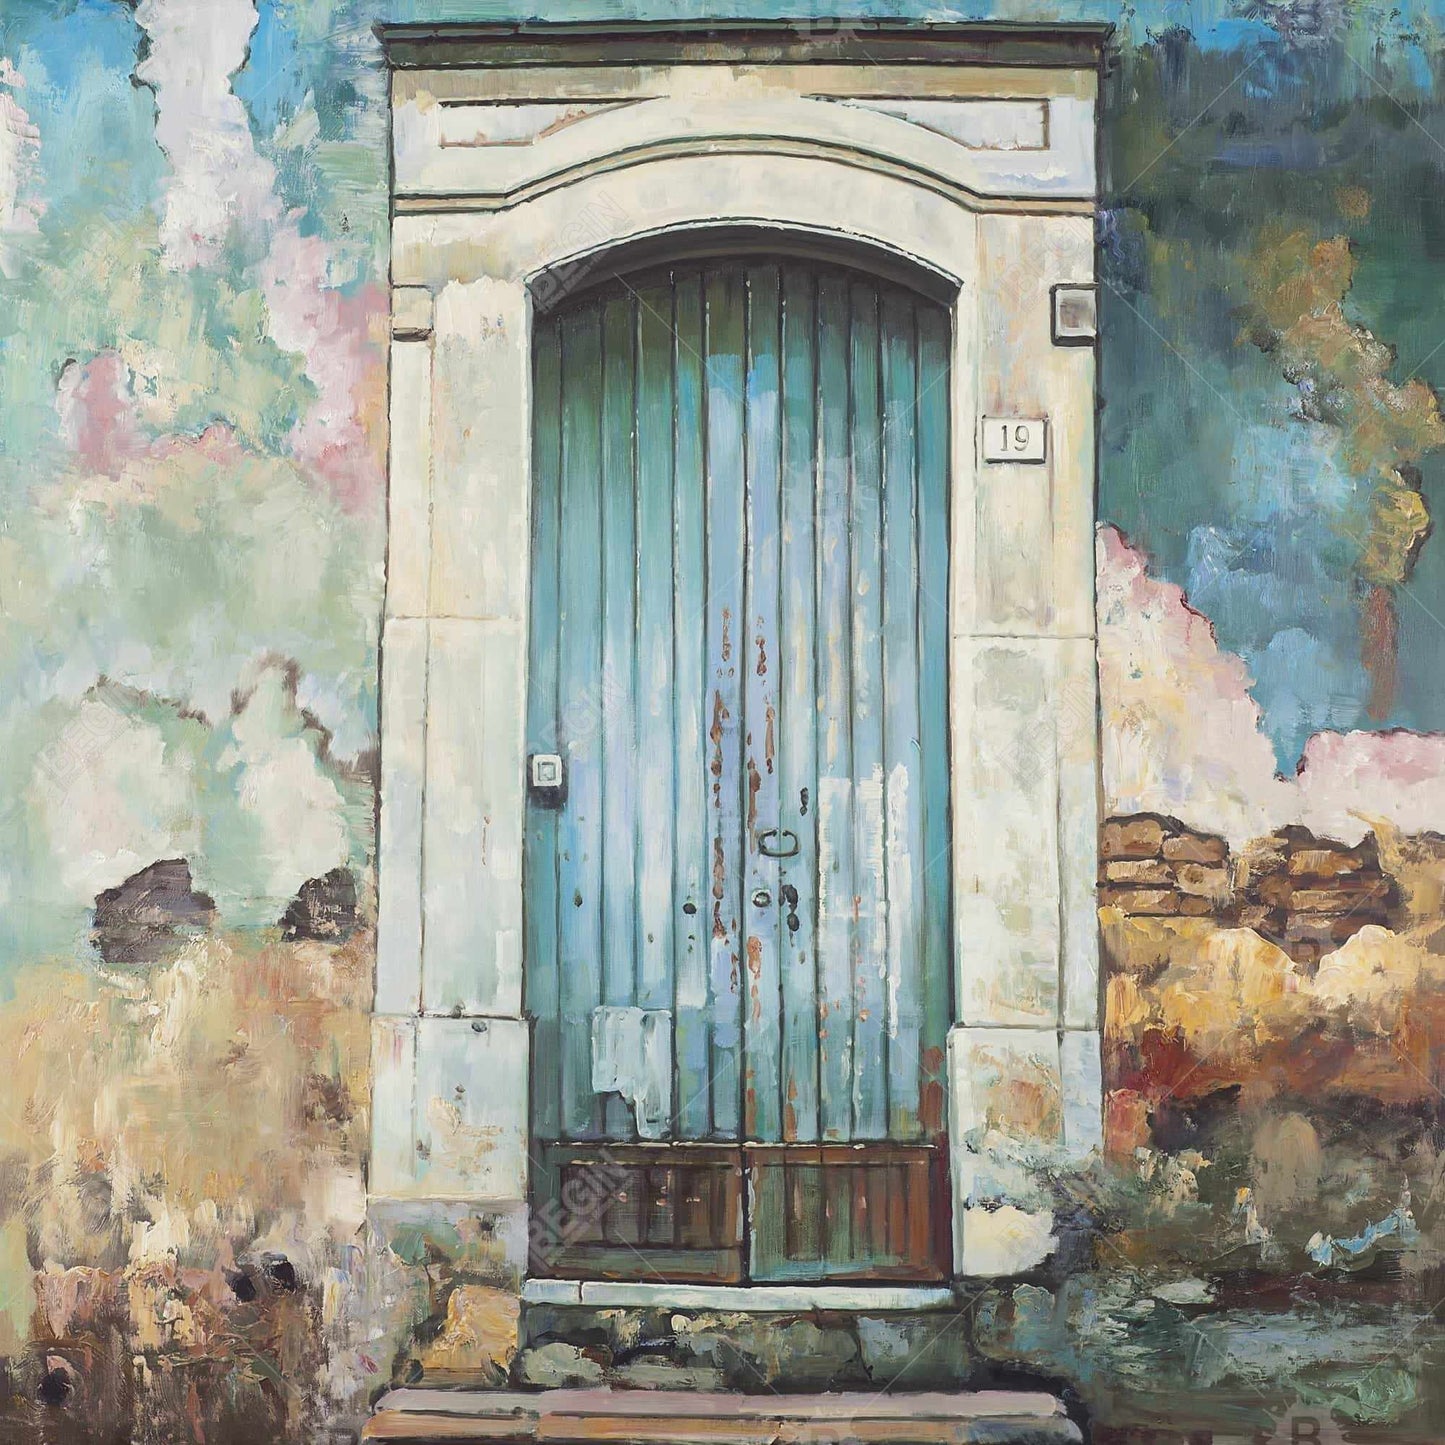 Blue door of an old building - 12x12 Print on canvas